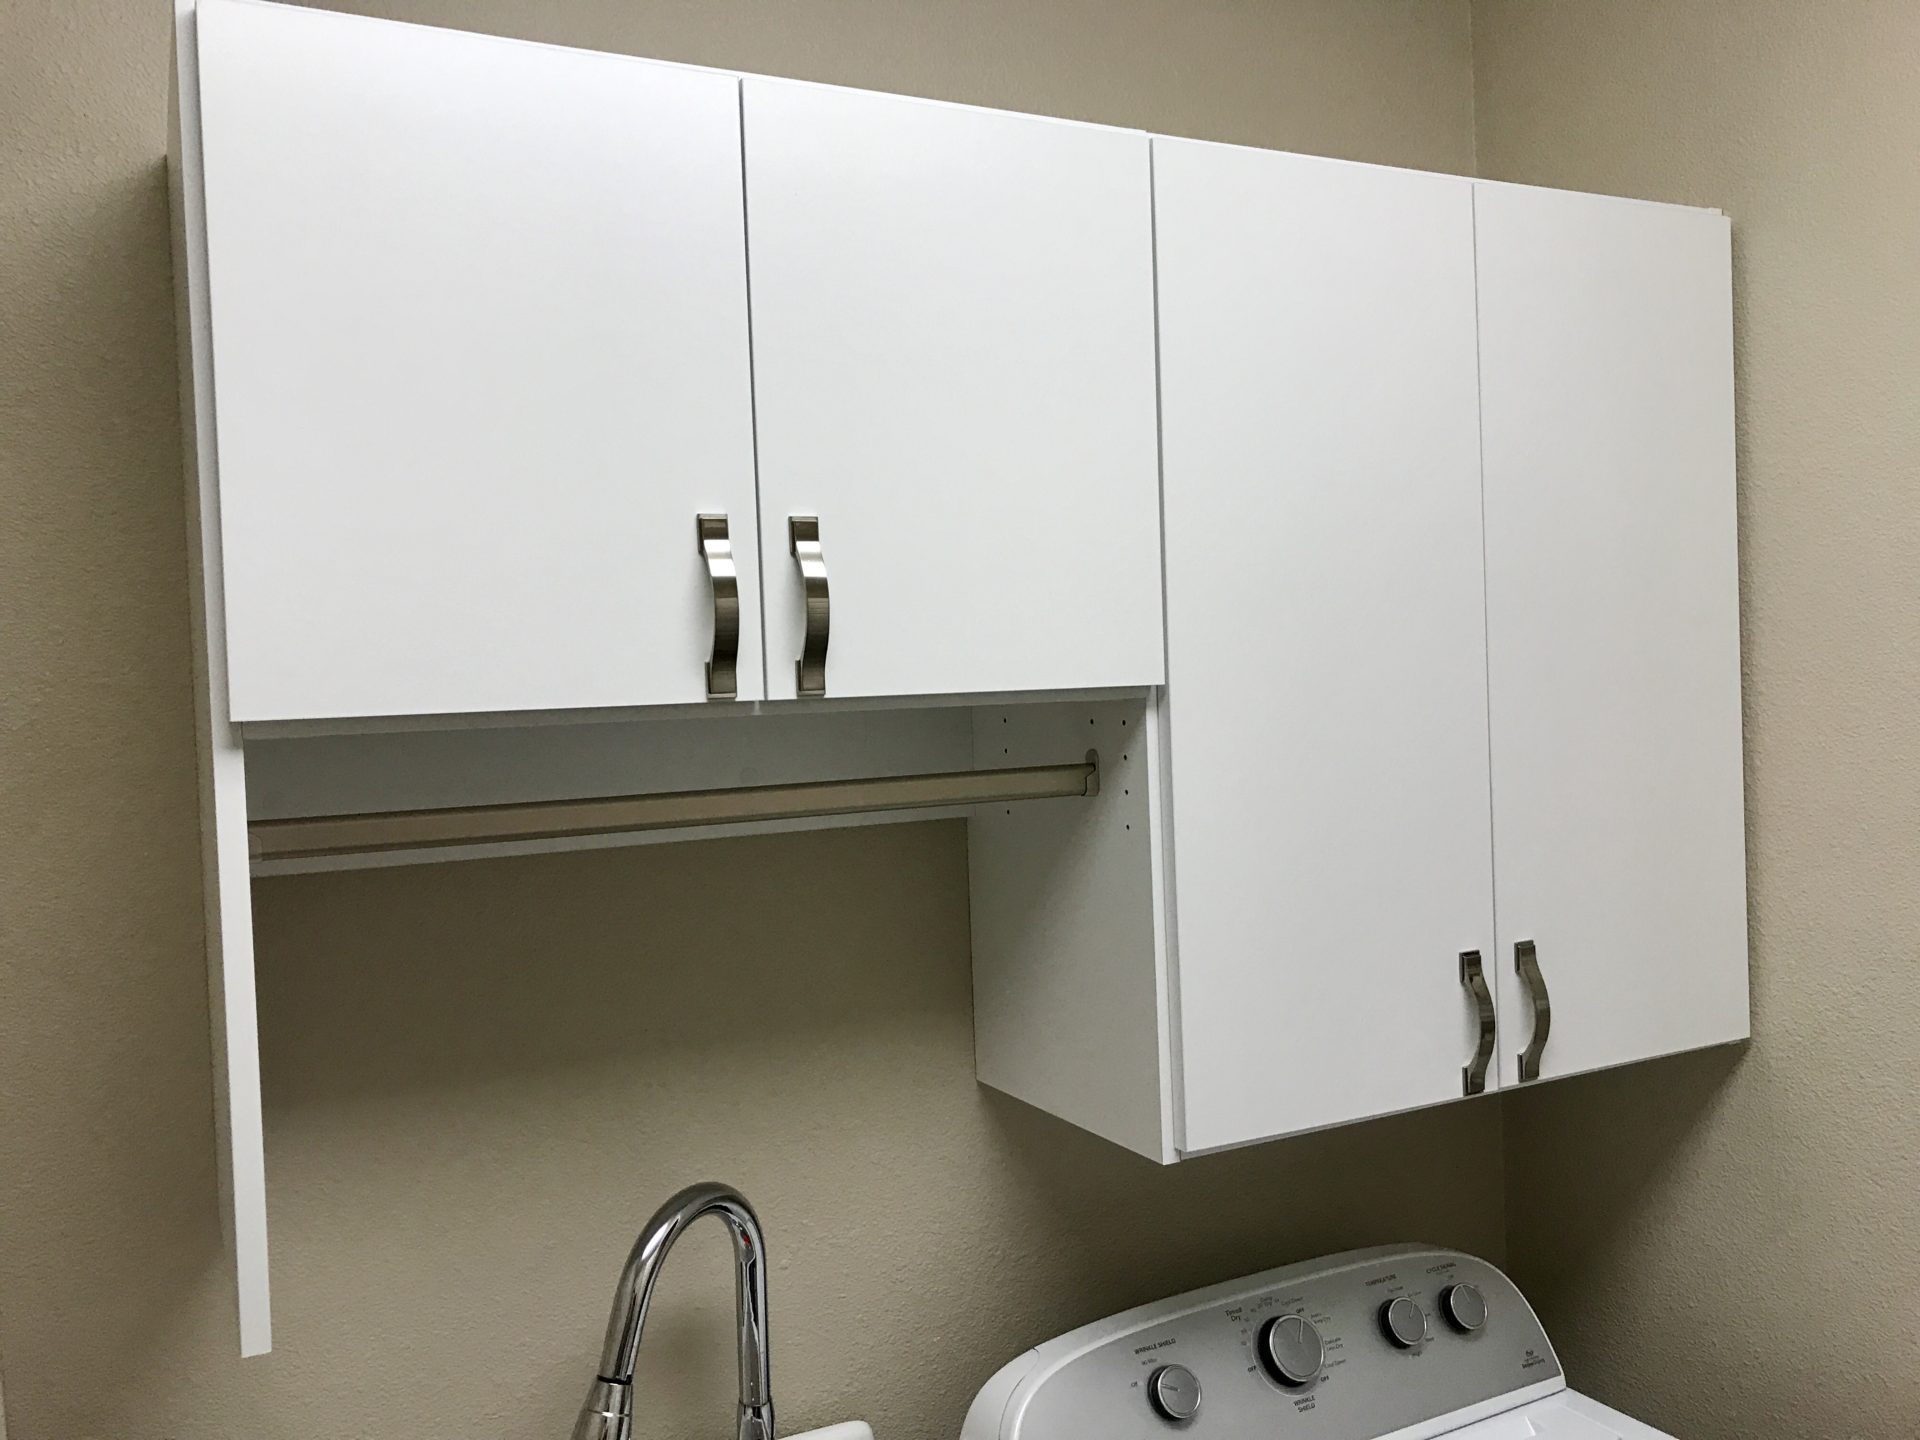 Laundry Room Cabinets With Ironing Board - Ideas Home Interior